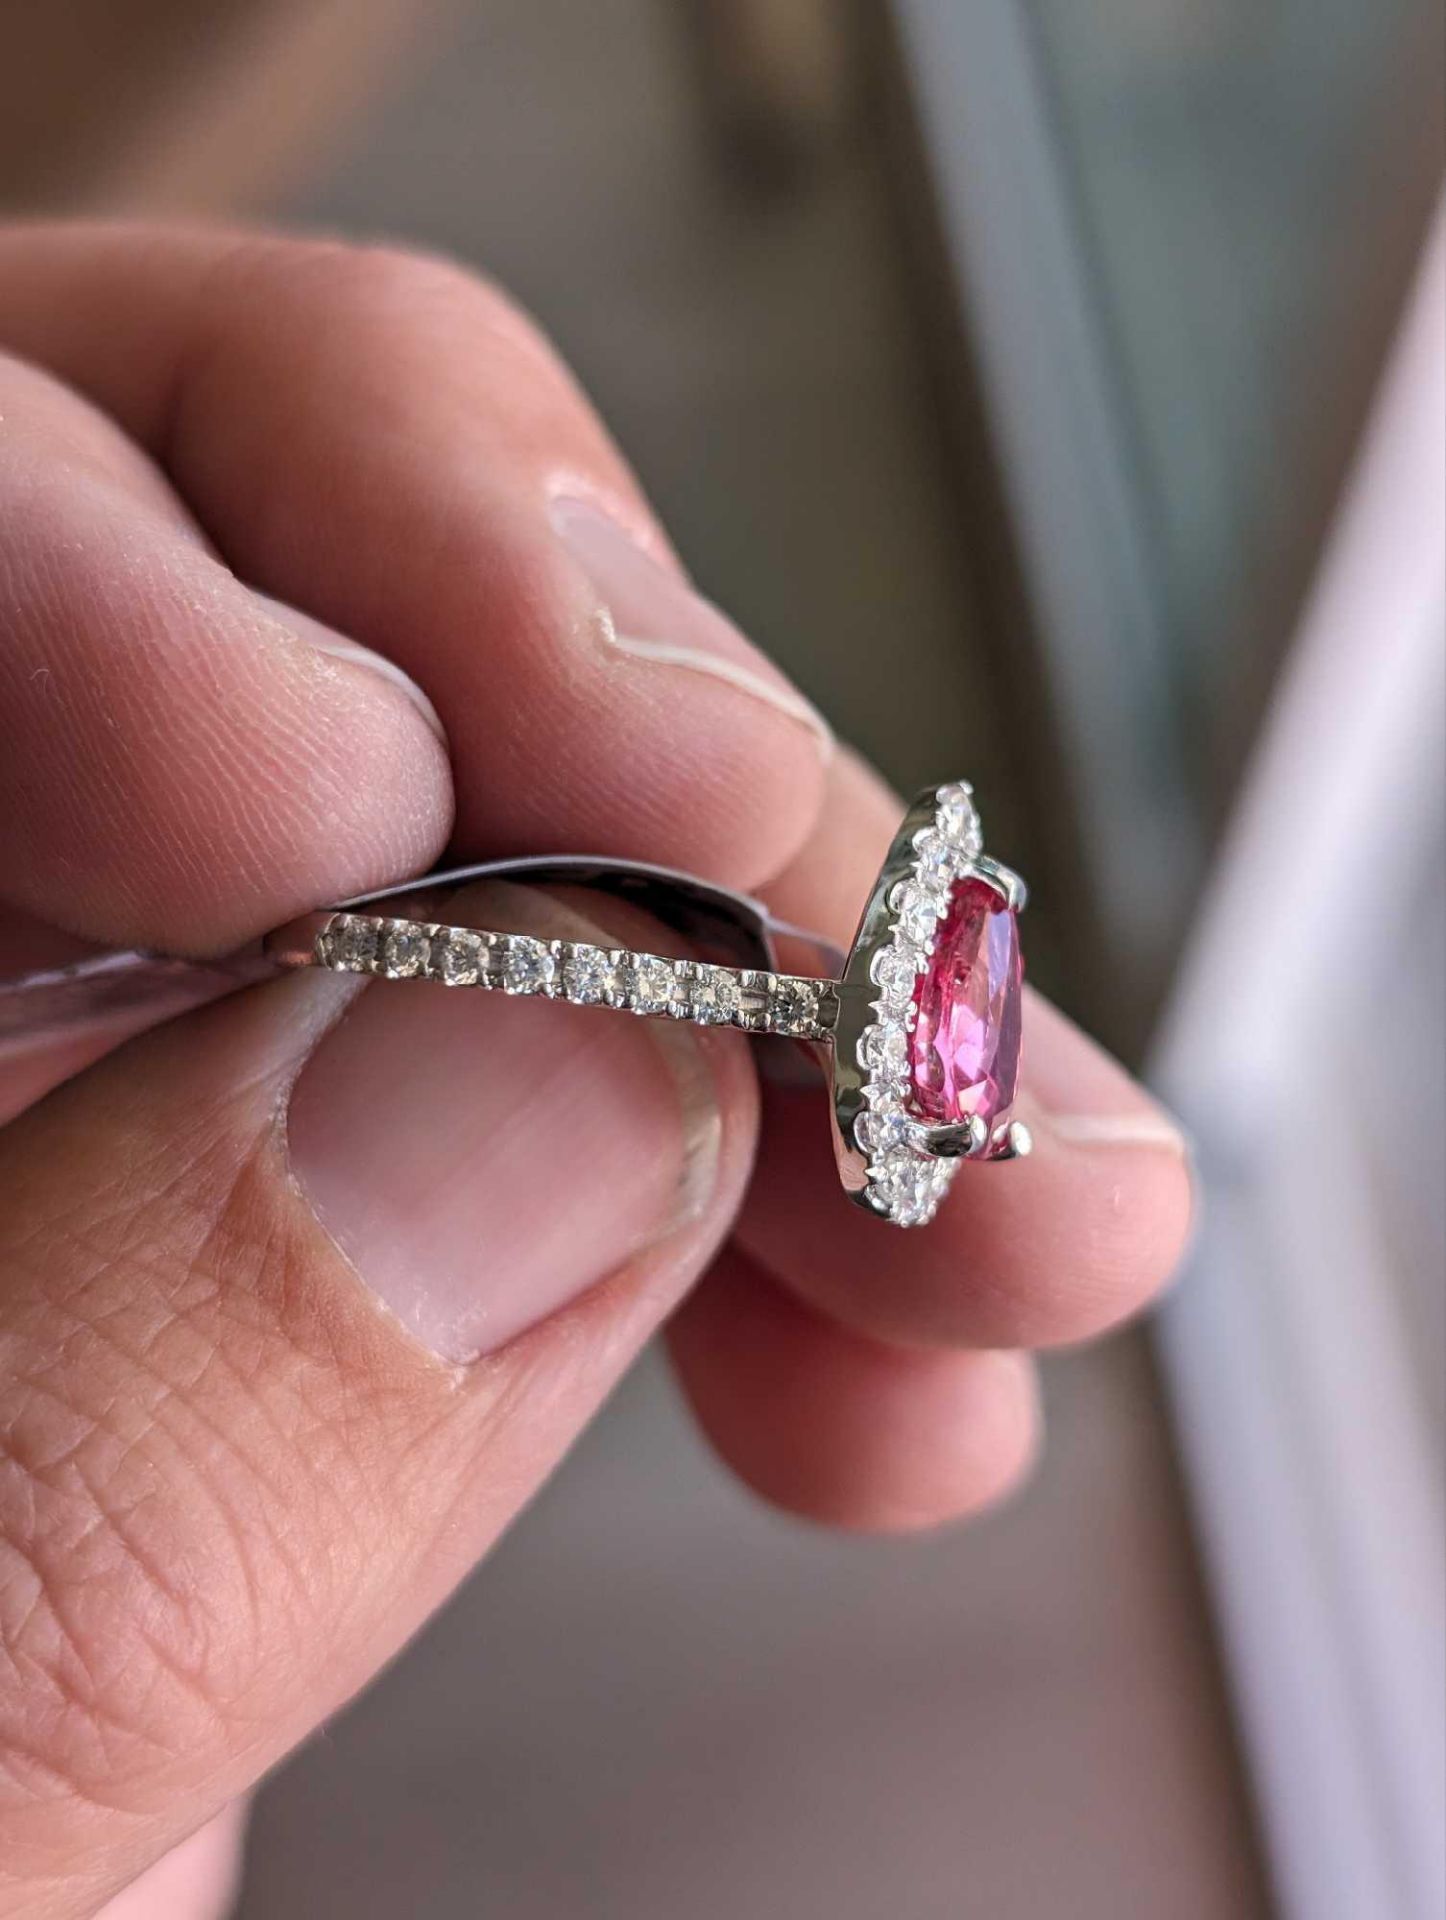 14KT White Gold 2.01 CTW Ruby and Diamond Ring - Image 2 of 9